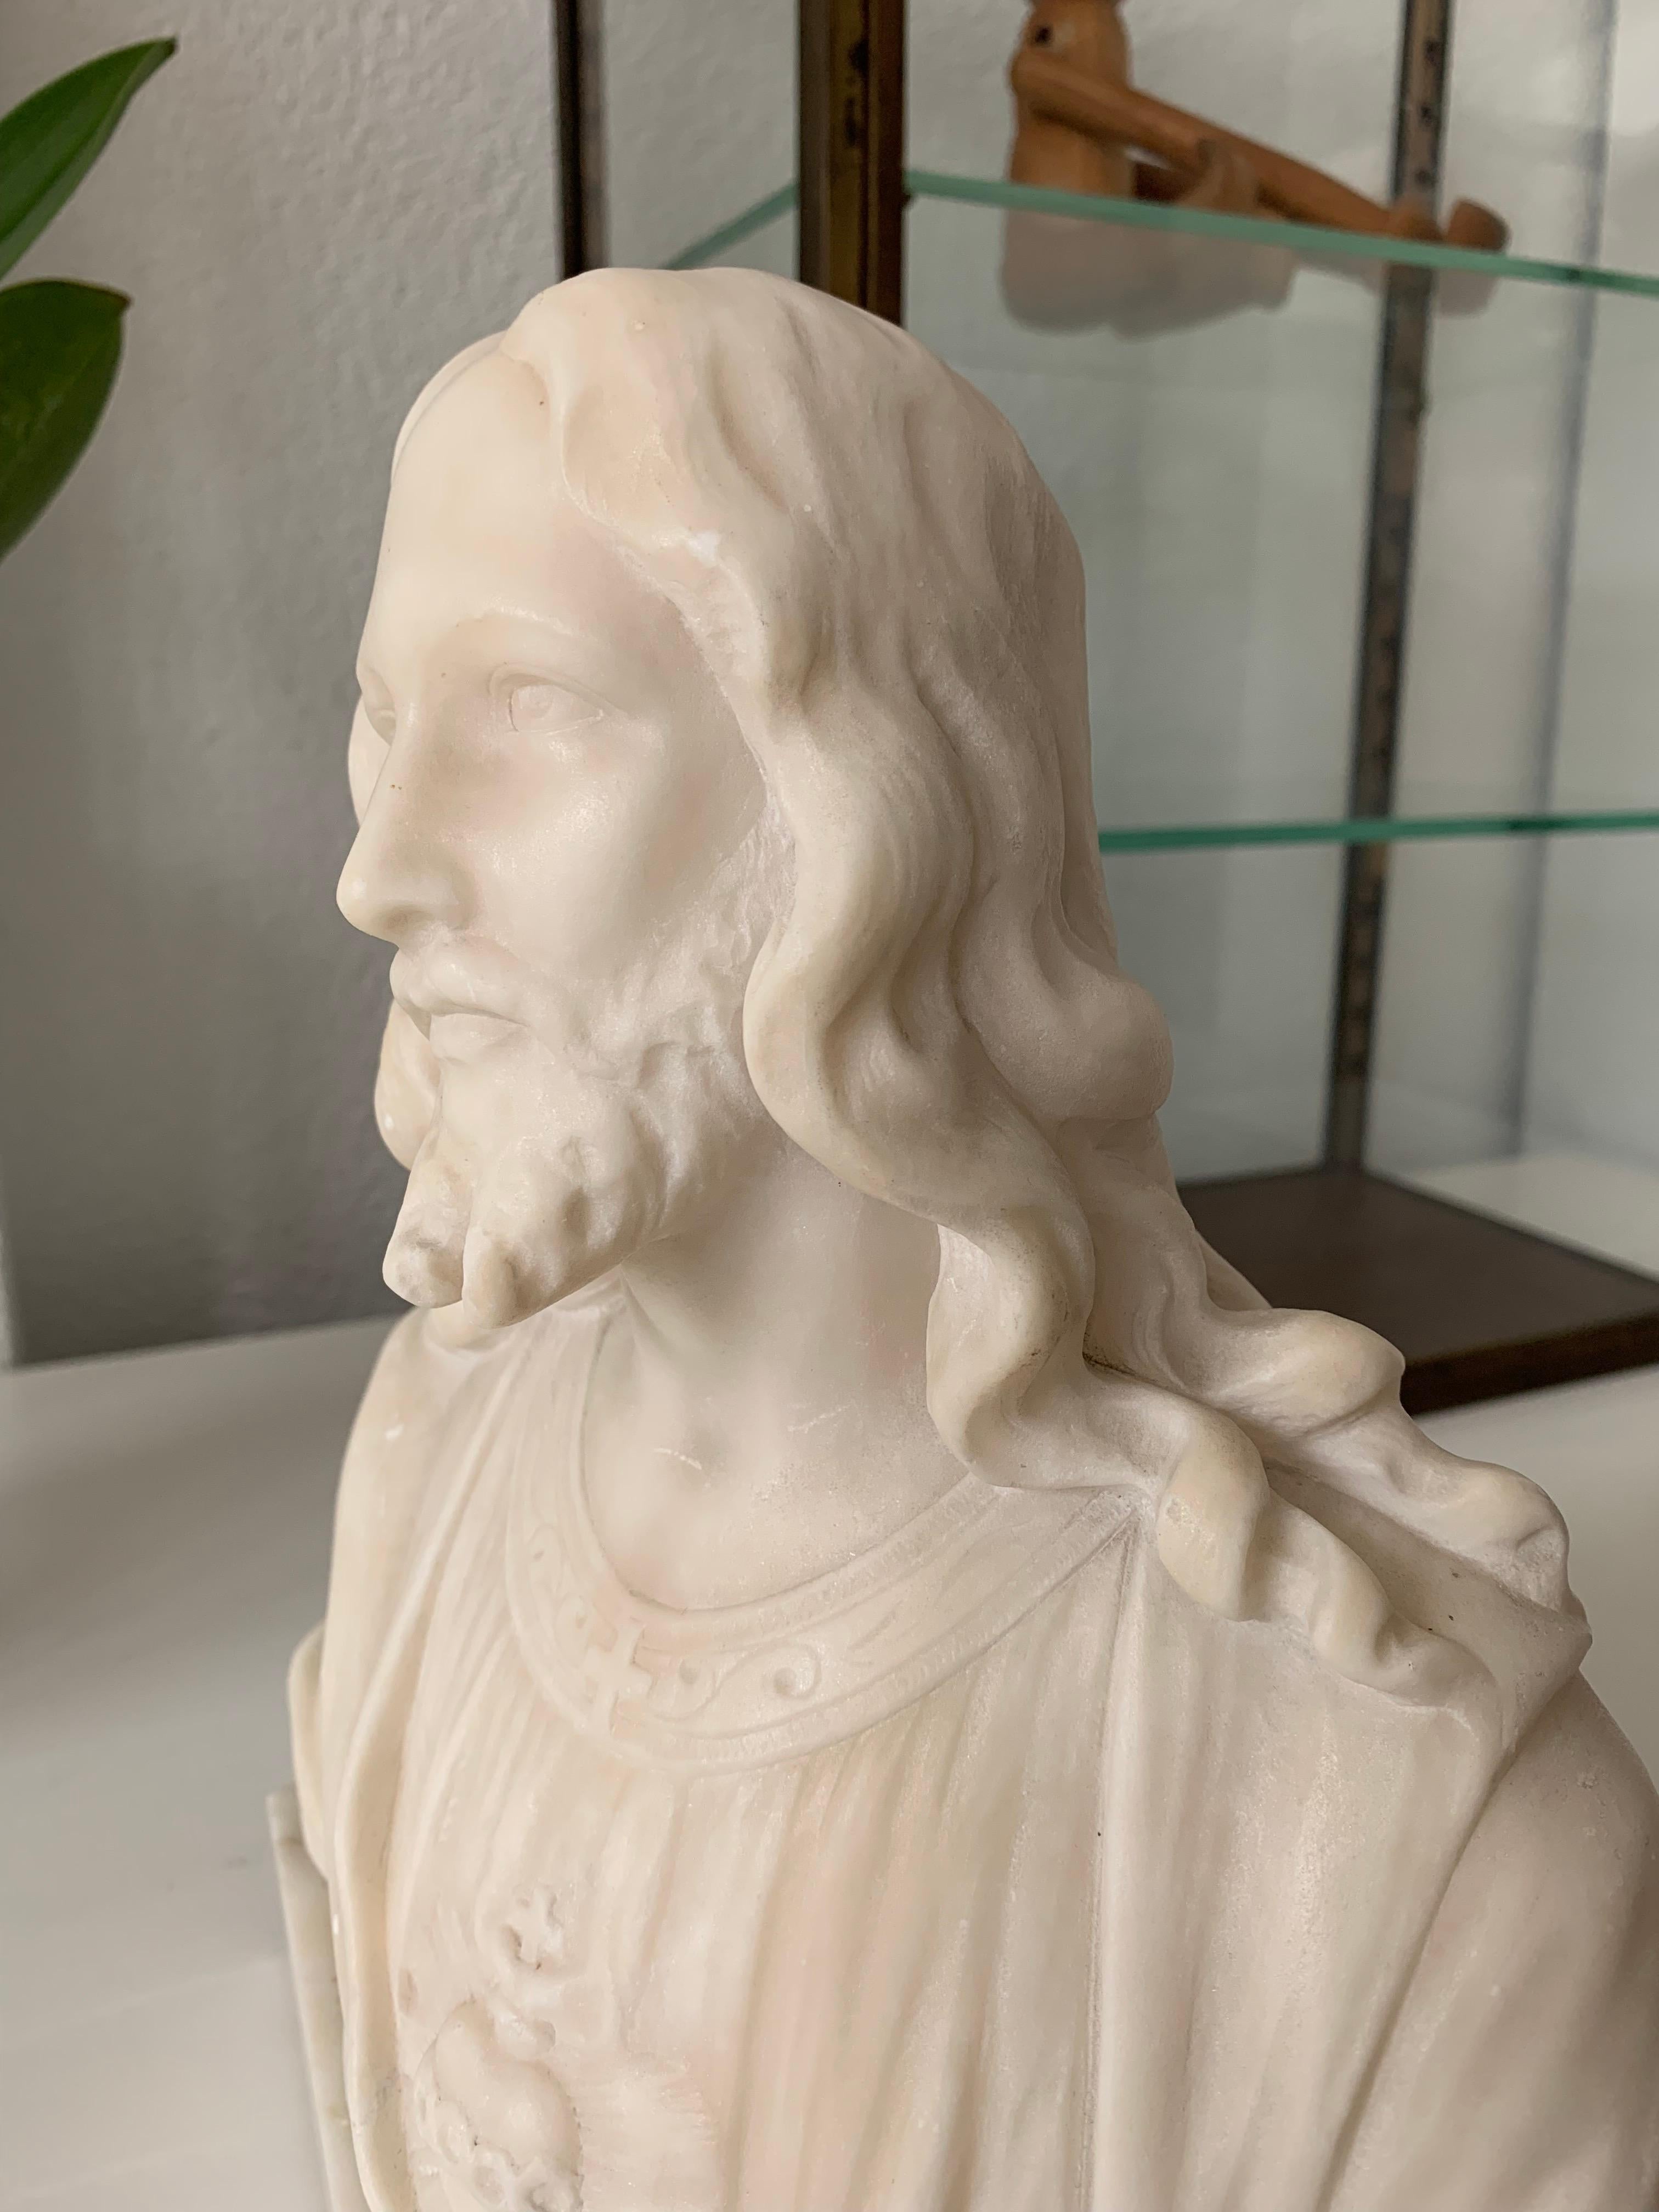 Early 1900s Signed Marble Sculpture / Bust of Jesus Christ on an Art Deco Base 9